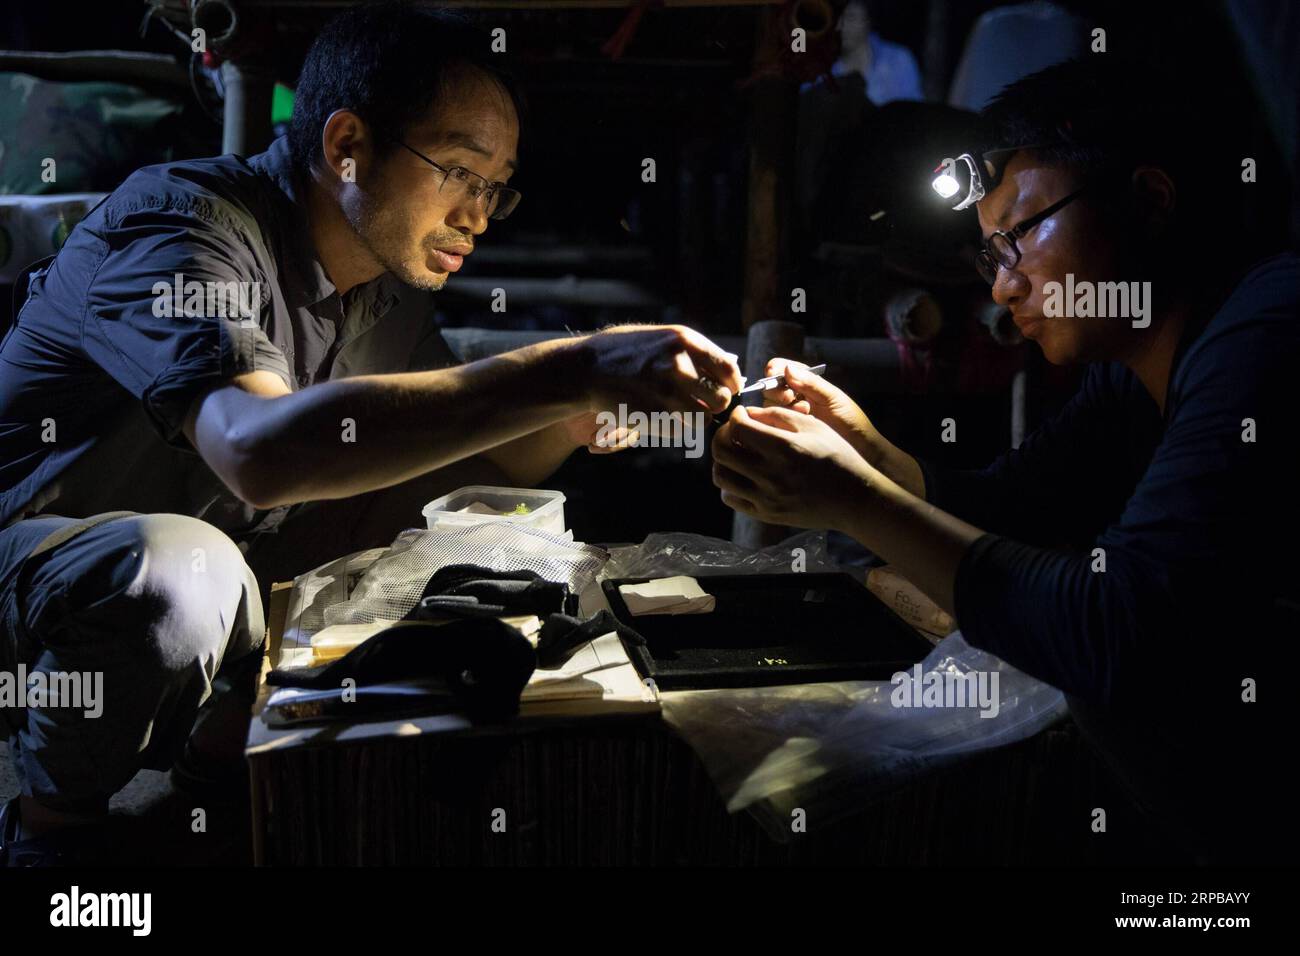 (190603) -- TAMANTHI, June 3, 2019 (Xinhua) -- Chinese researchers work on plant samples at their campsite in the Tamanthi Wildlife Sanctuary in north Myanmar, May 27, 2019. A China-Myanmar joint field expedition, made up with researchers from the Southeast Asia Biodiversity Research Institute of the Chinese Academy of Sciences (CAS-SEABRI) and the Natural Resources and Environmental Conservation of Myanmar, is doing researches on the biodiversity of the Tamanthi Wildlife Sanctuary in northern Myanmar. The expedition, the eighth of its kind since 2014, began on May 14 and will last til June 15 Stock Photo